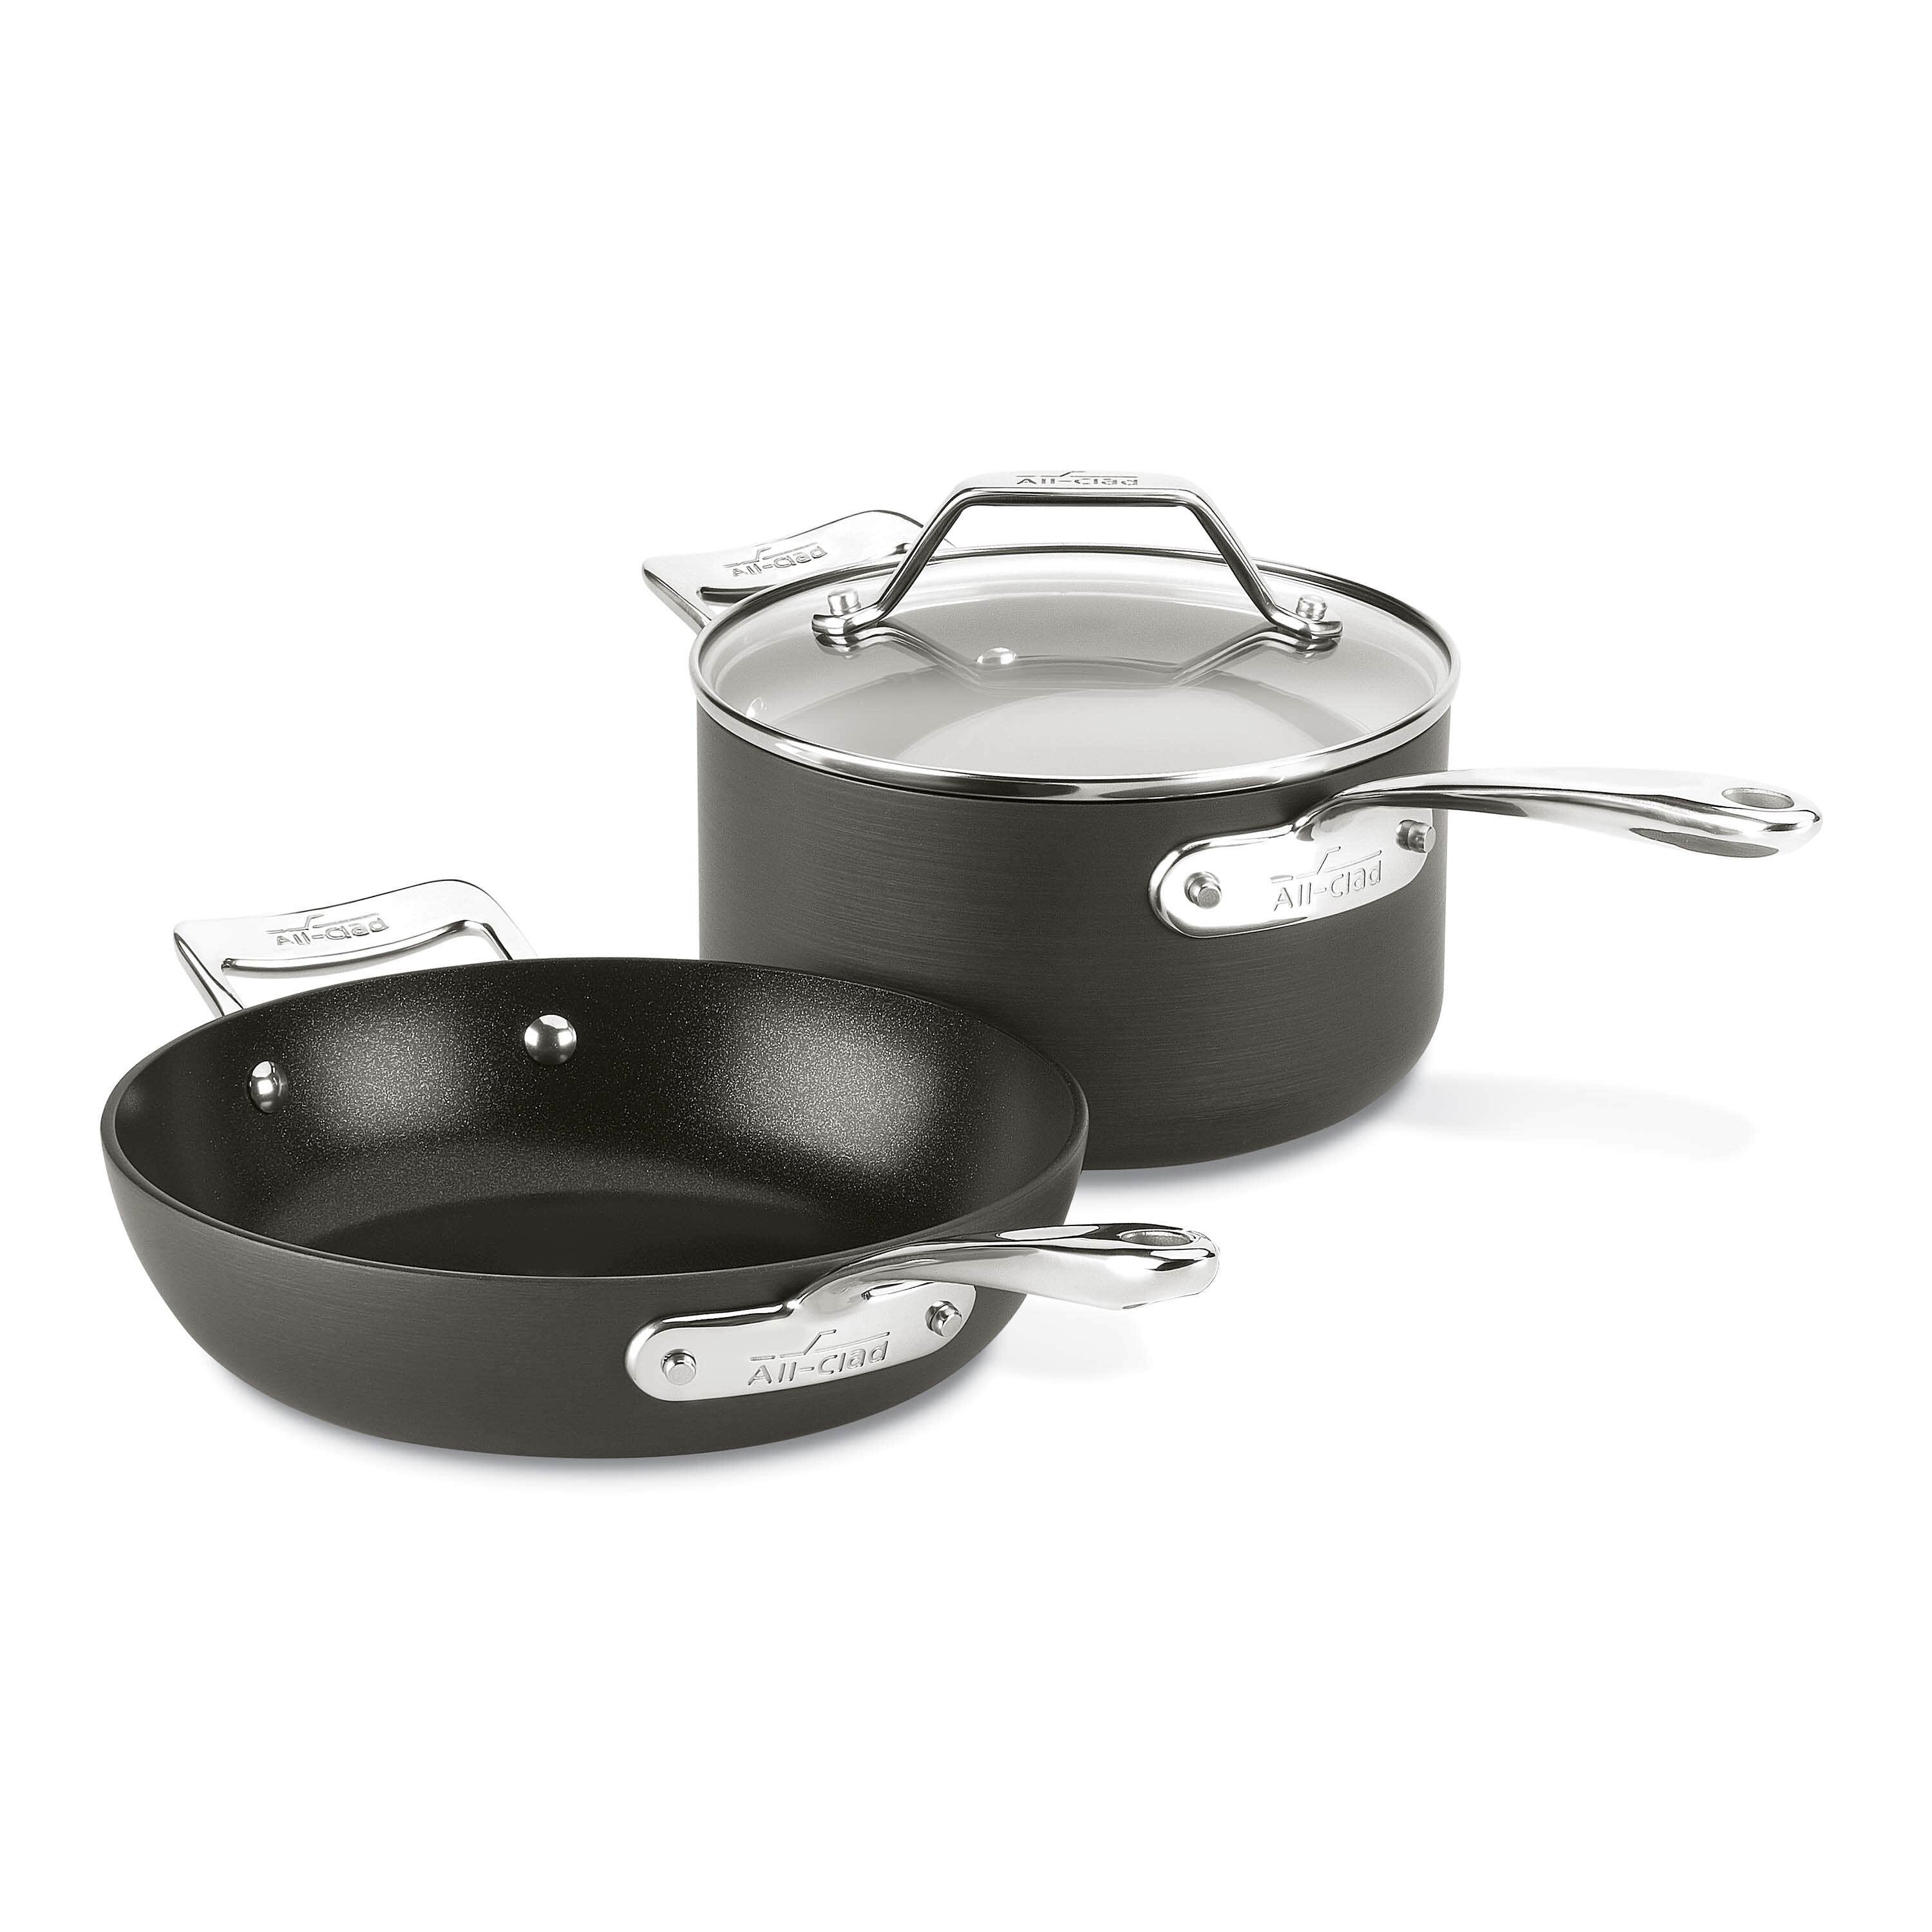 All-Clad Stainless Steel 10-Piece Nonstick Cookware Set 